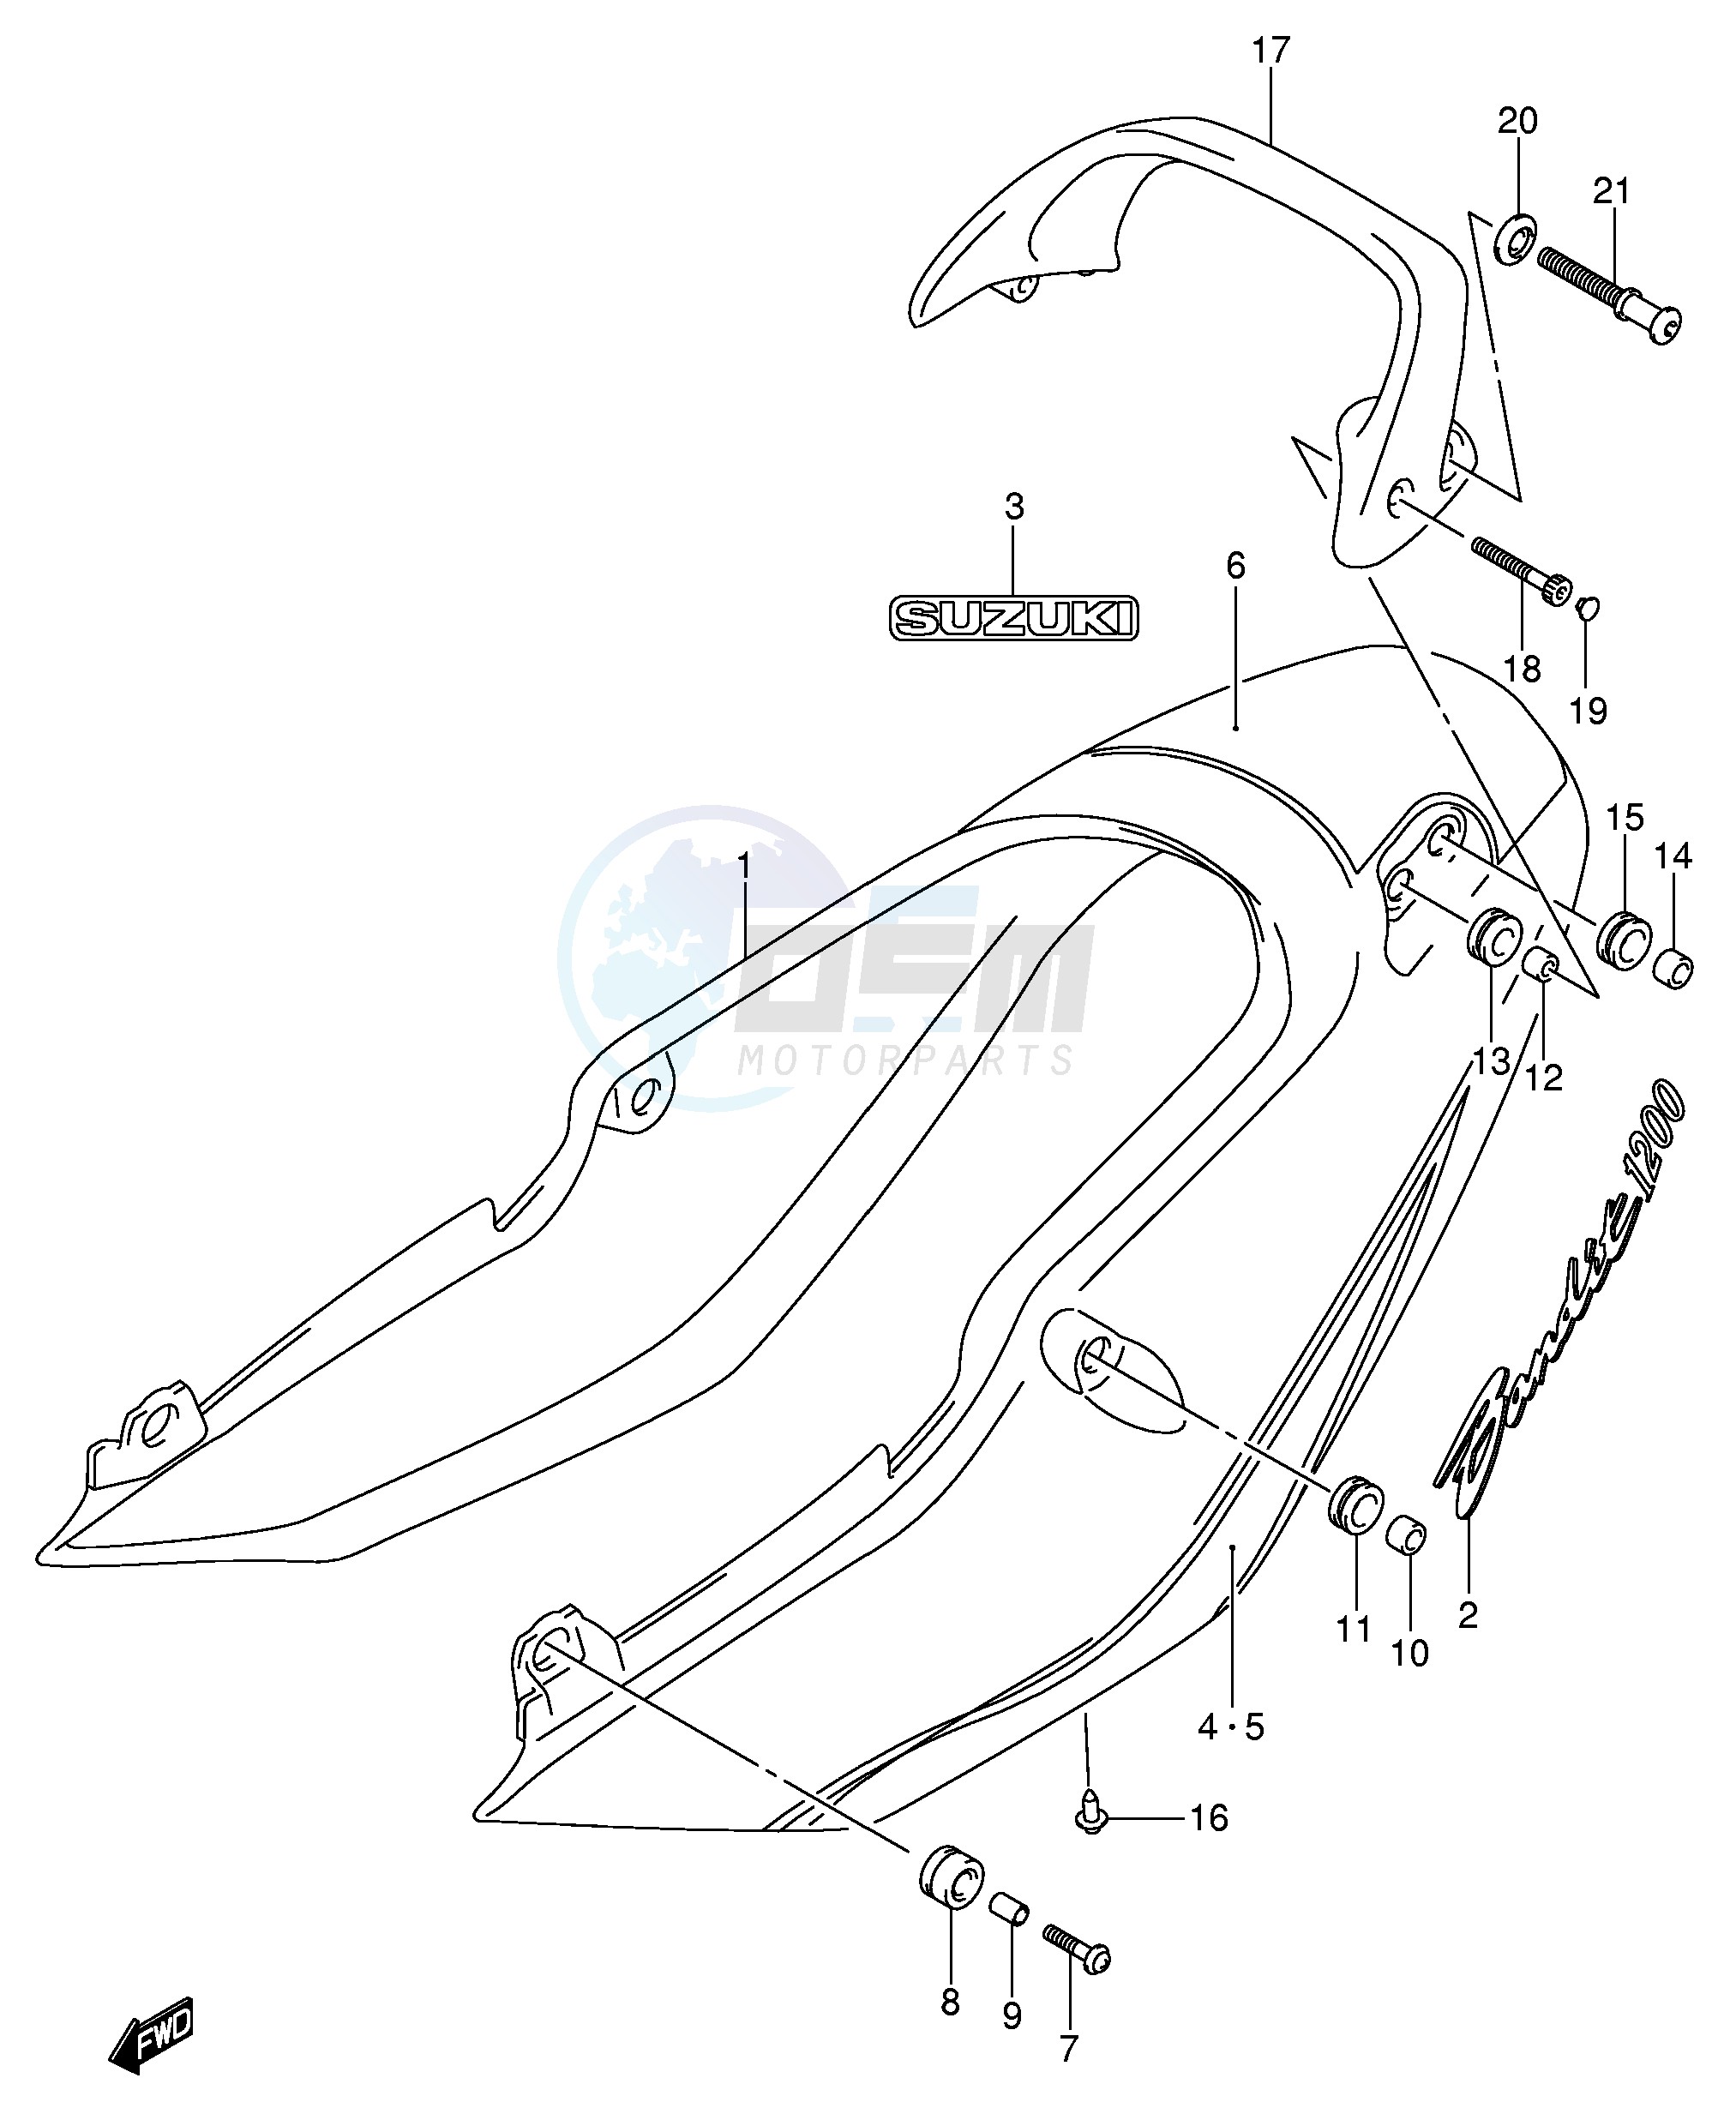 SEAT TAIL COVER (GSF1200ZK5) blueprint